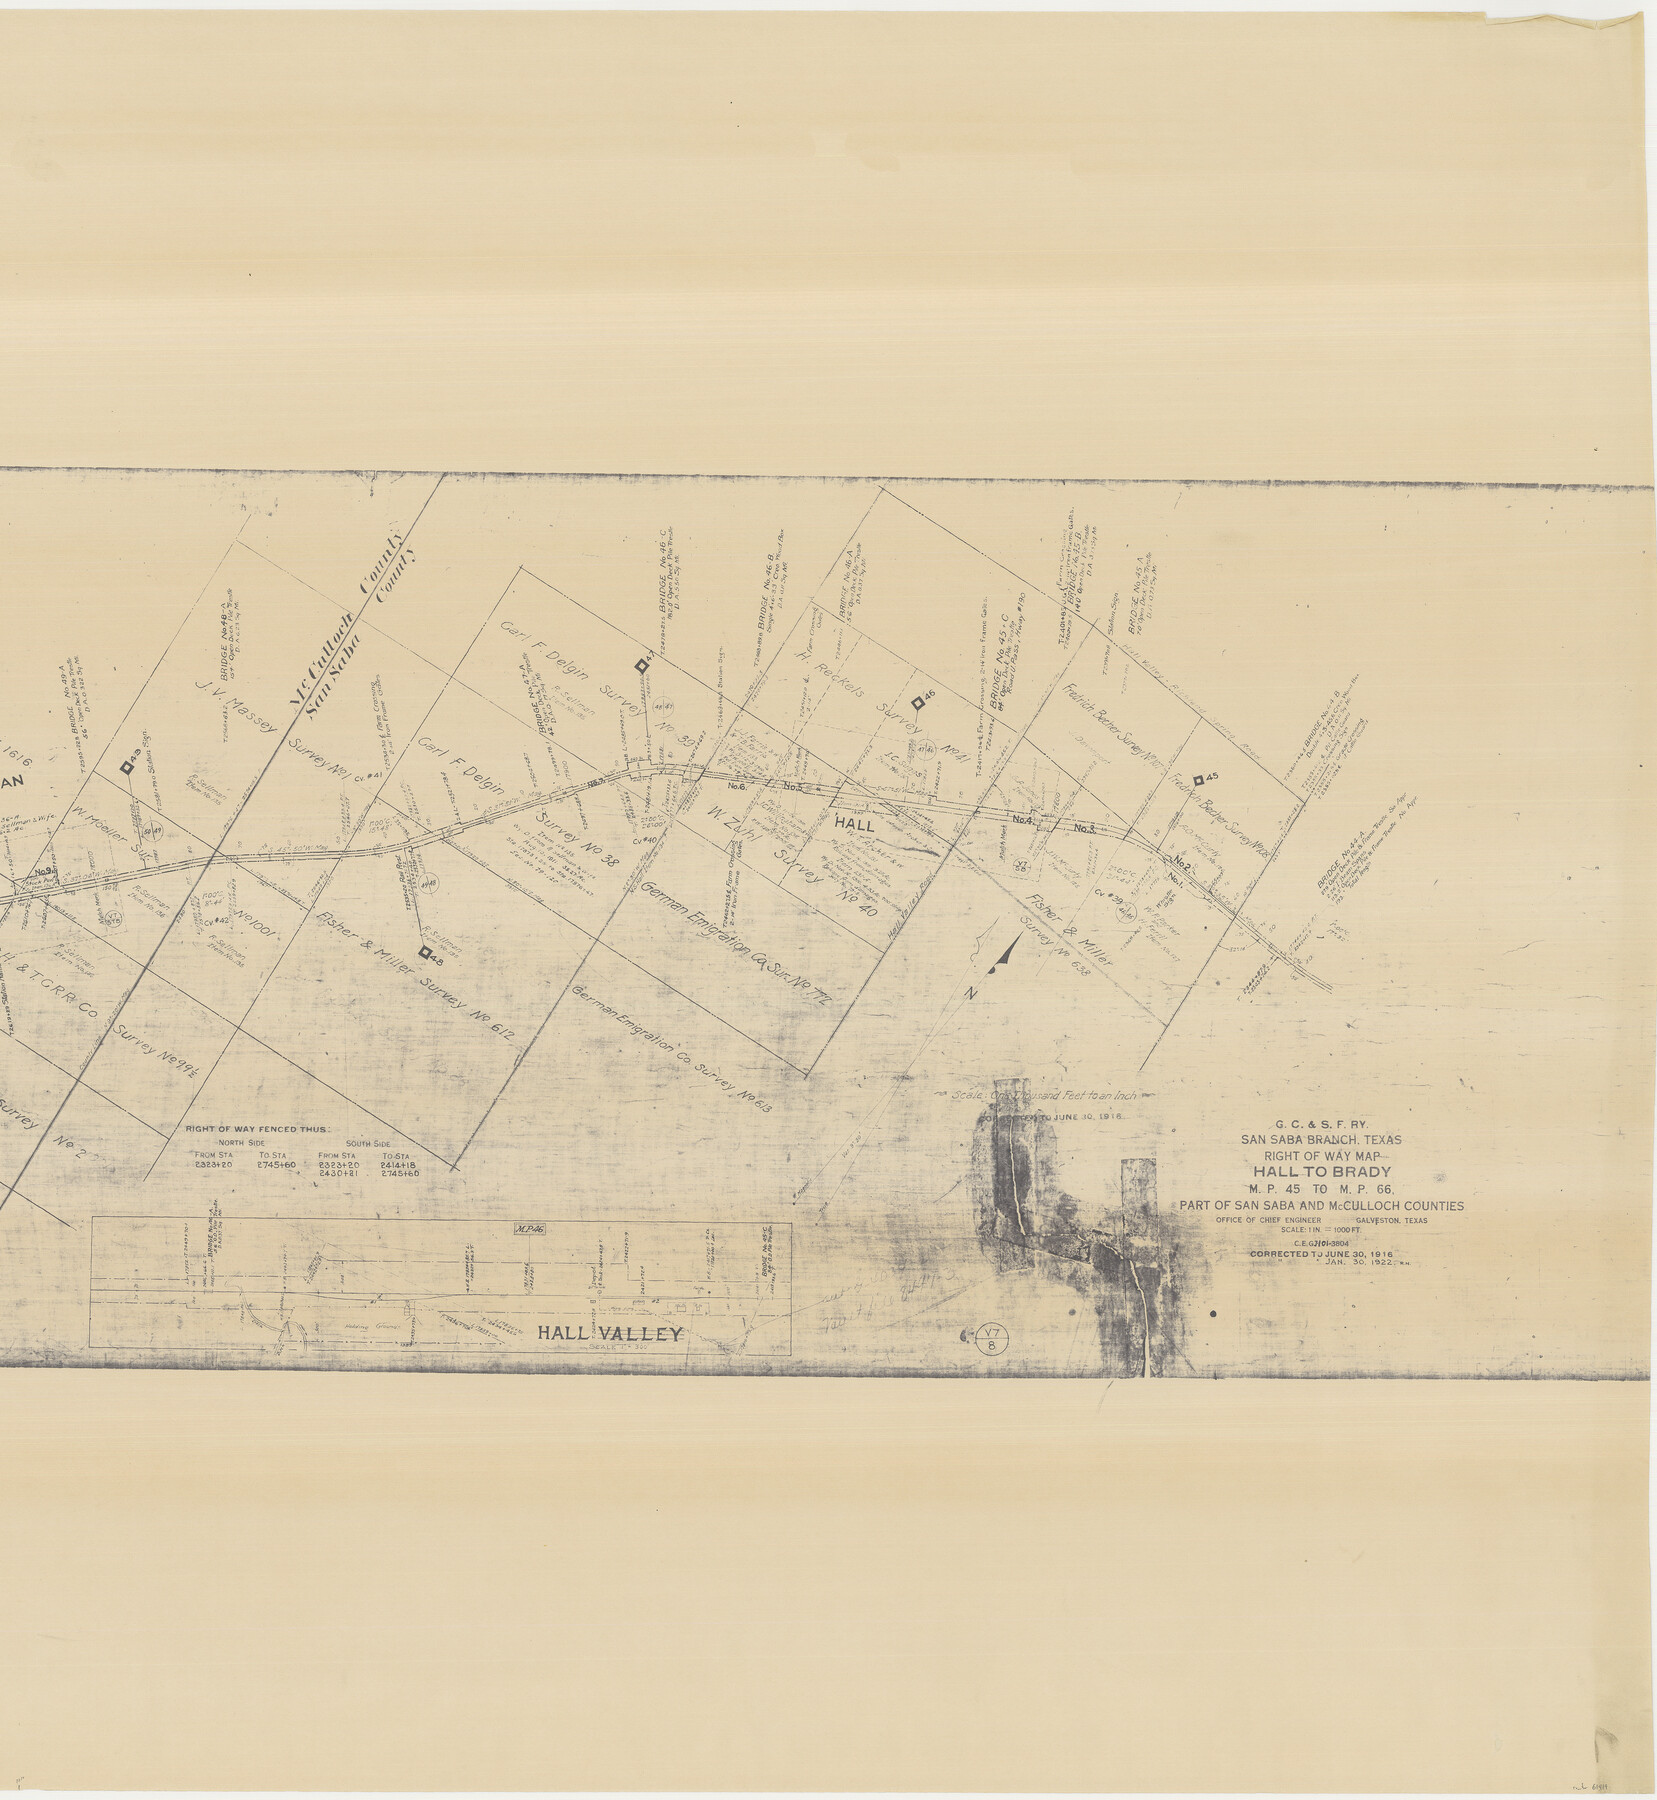 61419, G. C. & S. F. Ry., San Saba Branch, Texas, Right of Way Map, Hall to Brady, General Map Collection